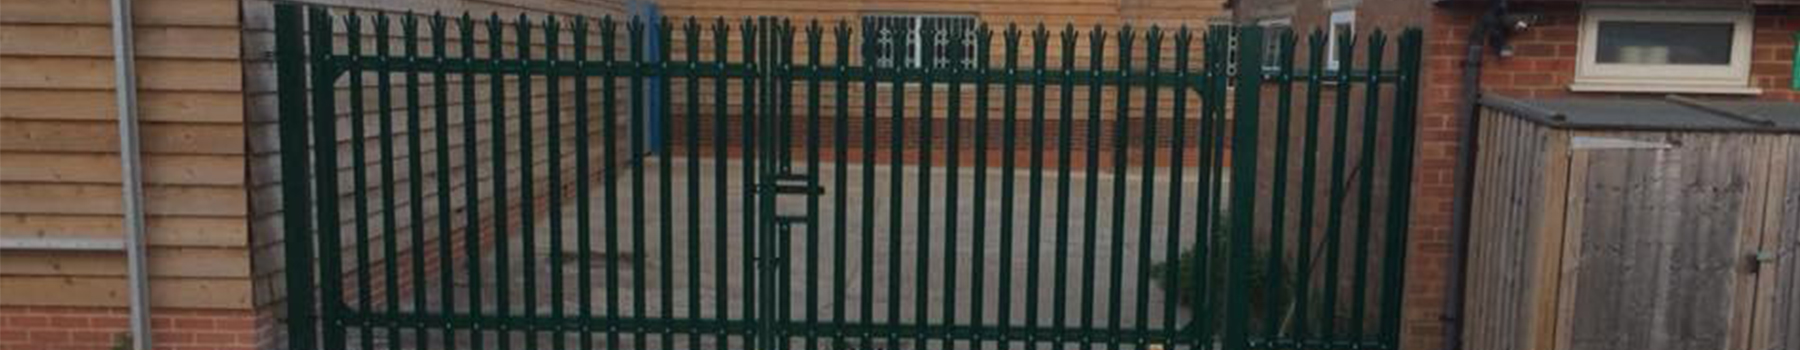 BN Fencing can supply commercial gates